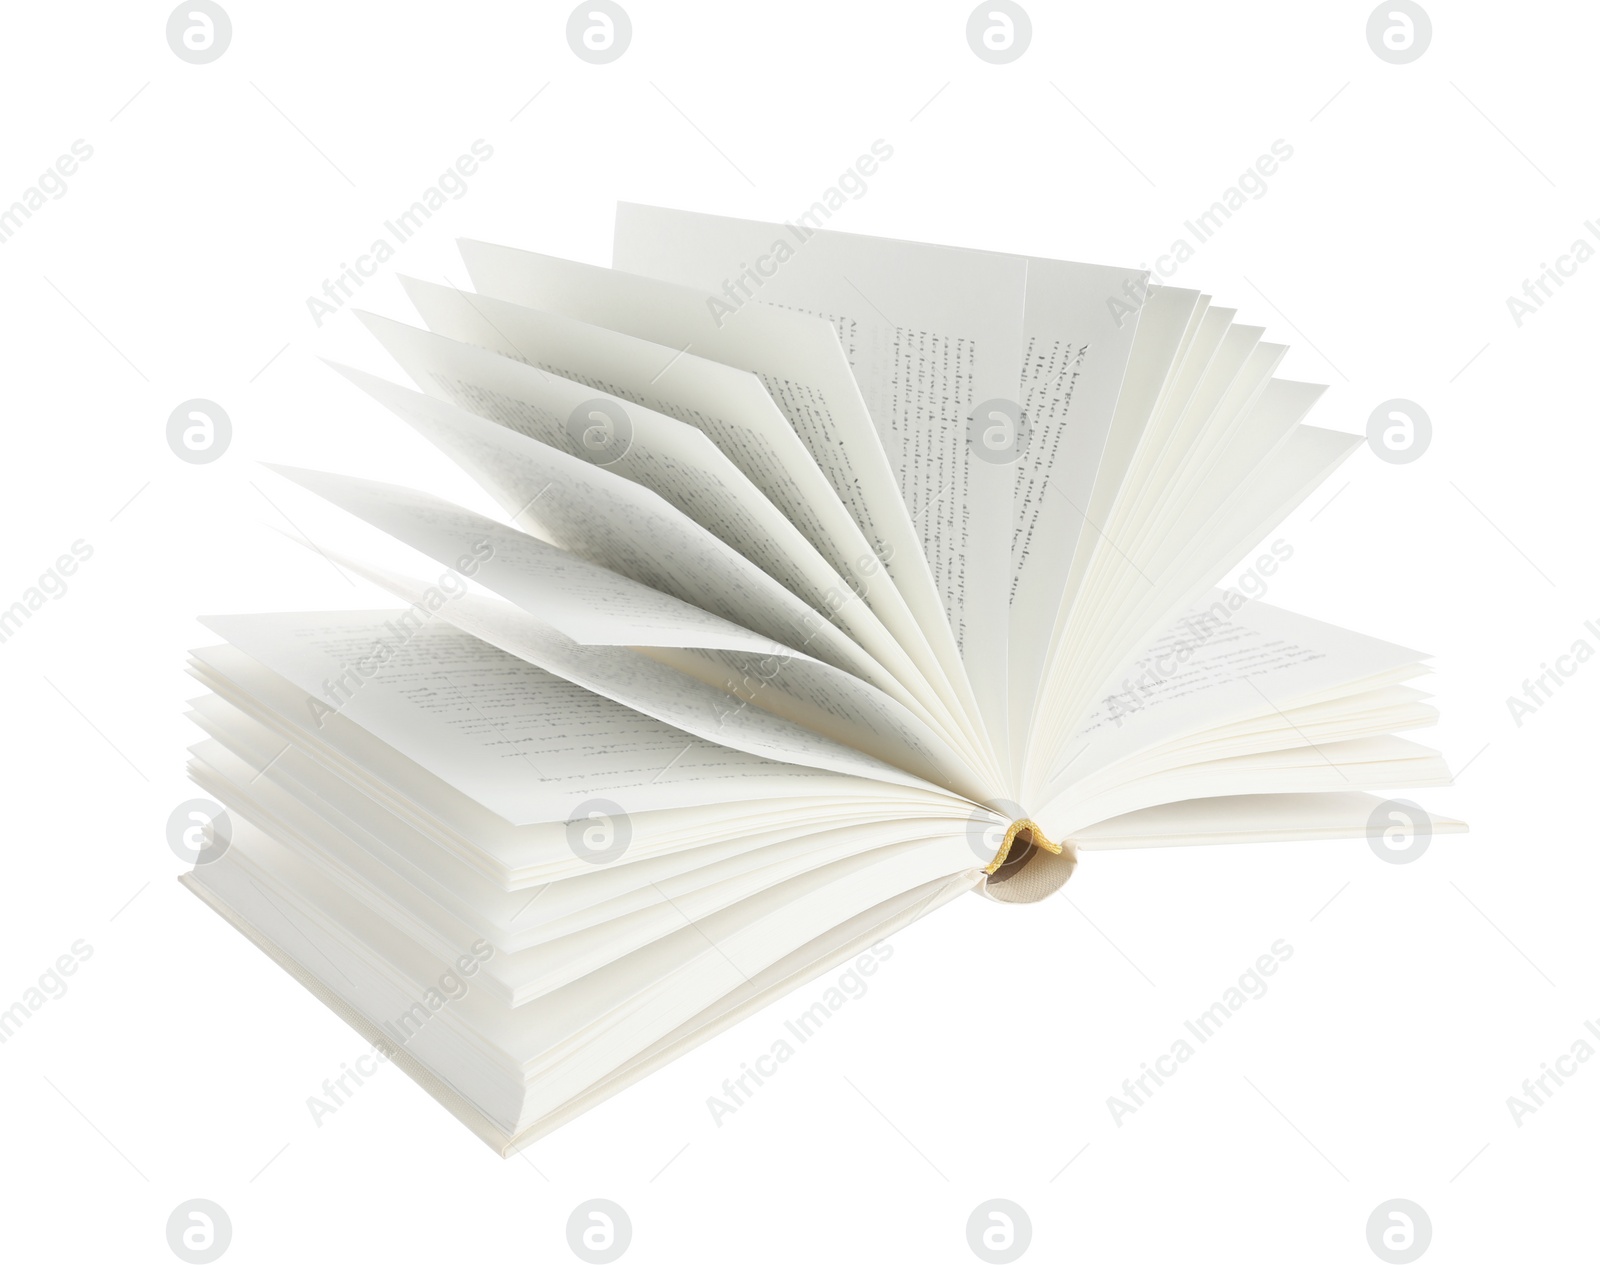 Photo of One open hardcover book isolated on white